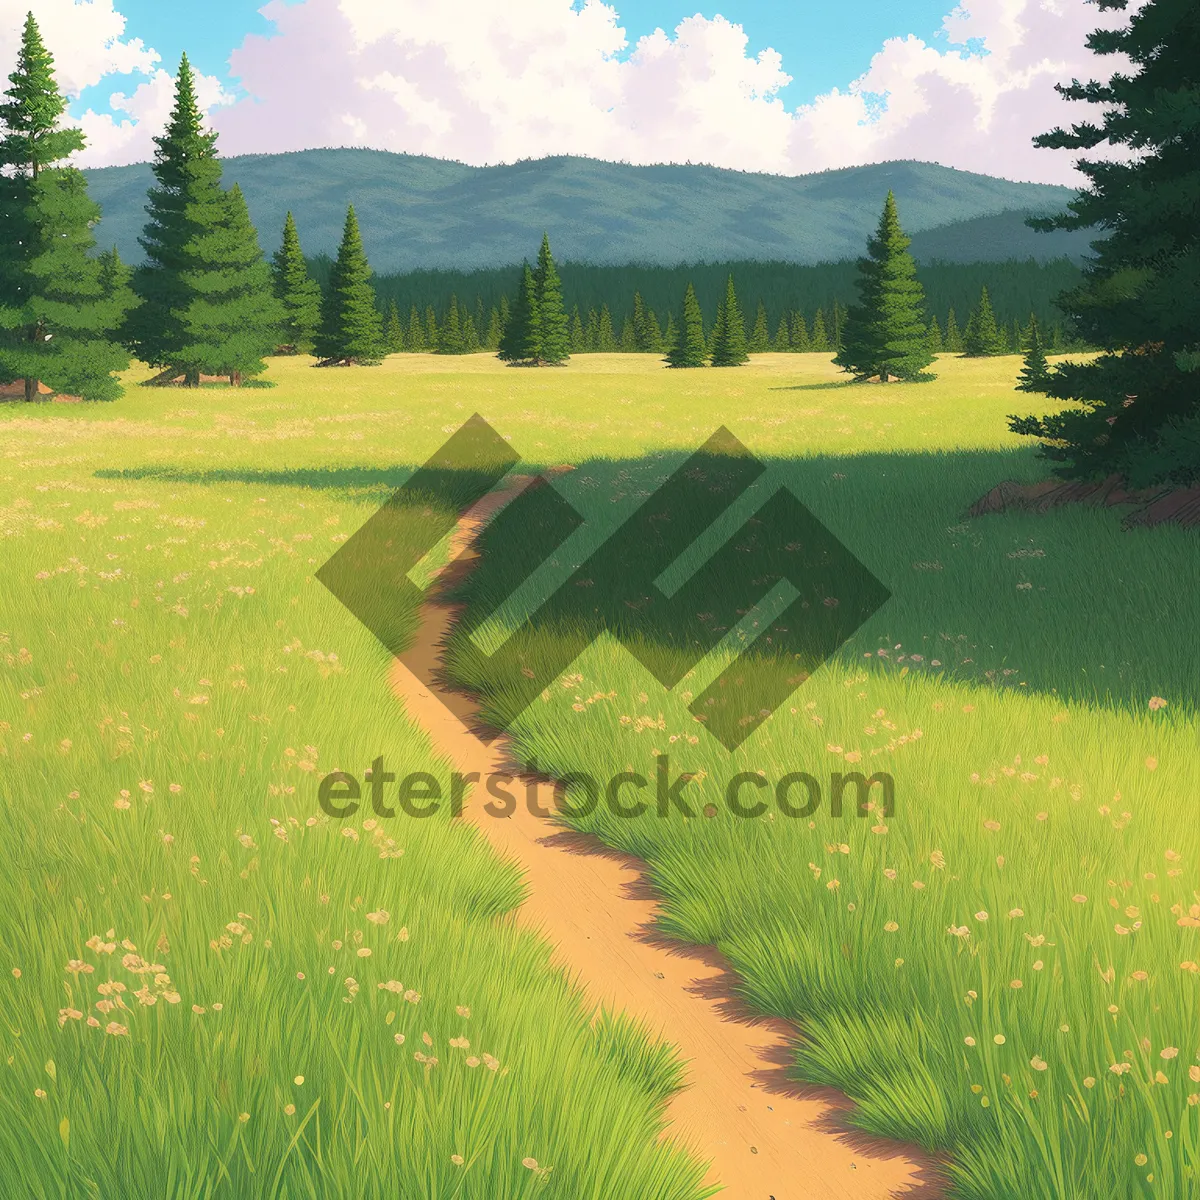 Picture of Idyllic Summer Scene: Rural Landscape with Trees and Meadow